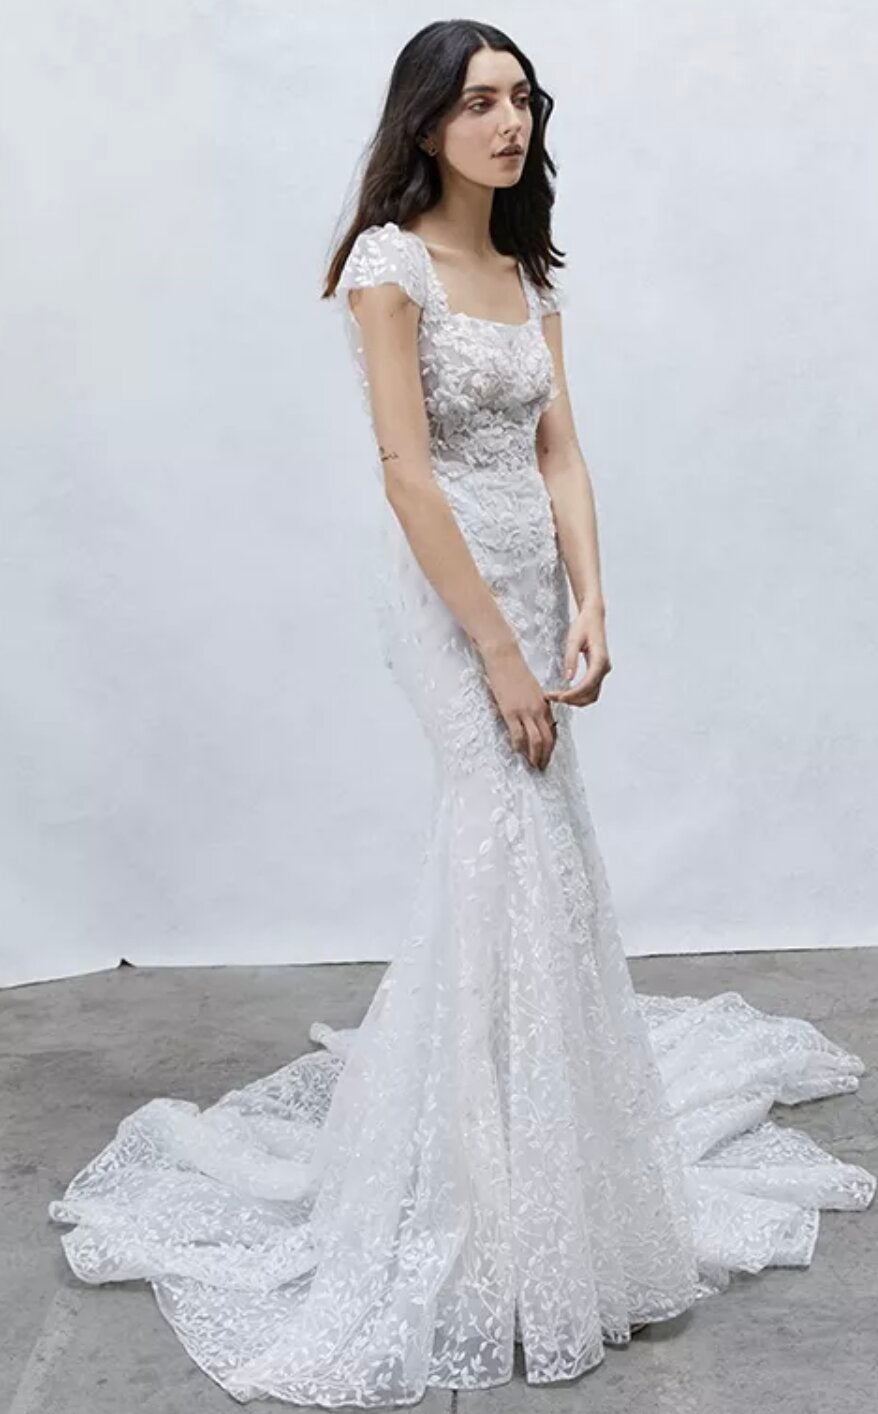 Nicefashion Womens Square Neck Cap Sleeve Lace Mermaid Wedding Bridal Gowns